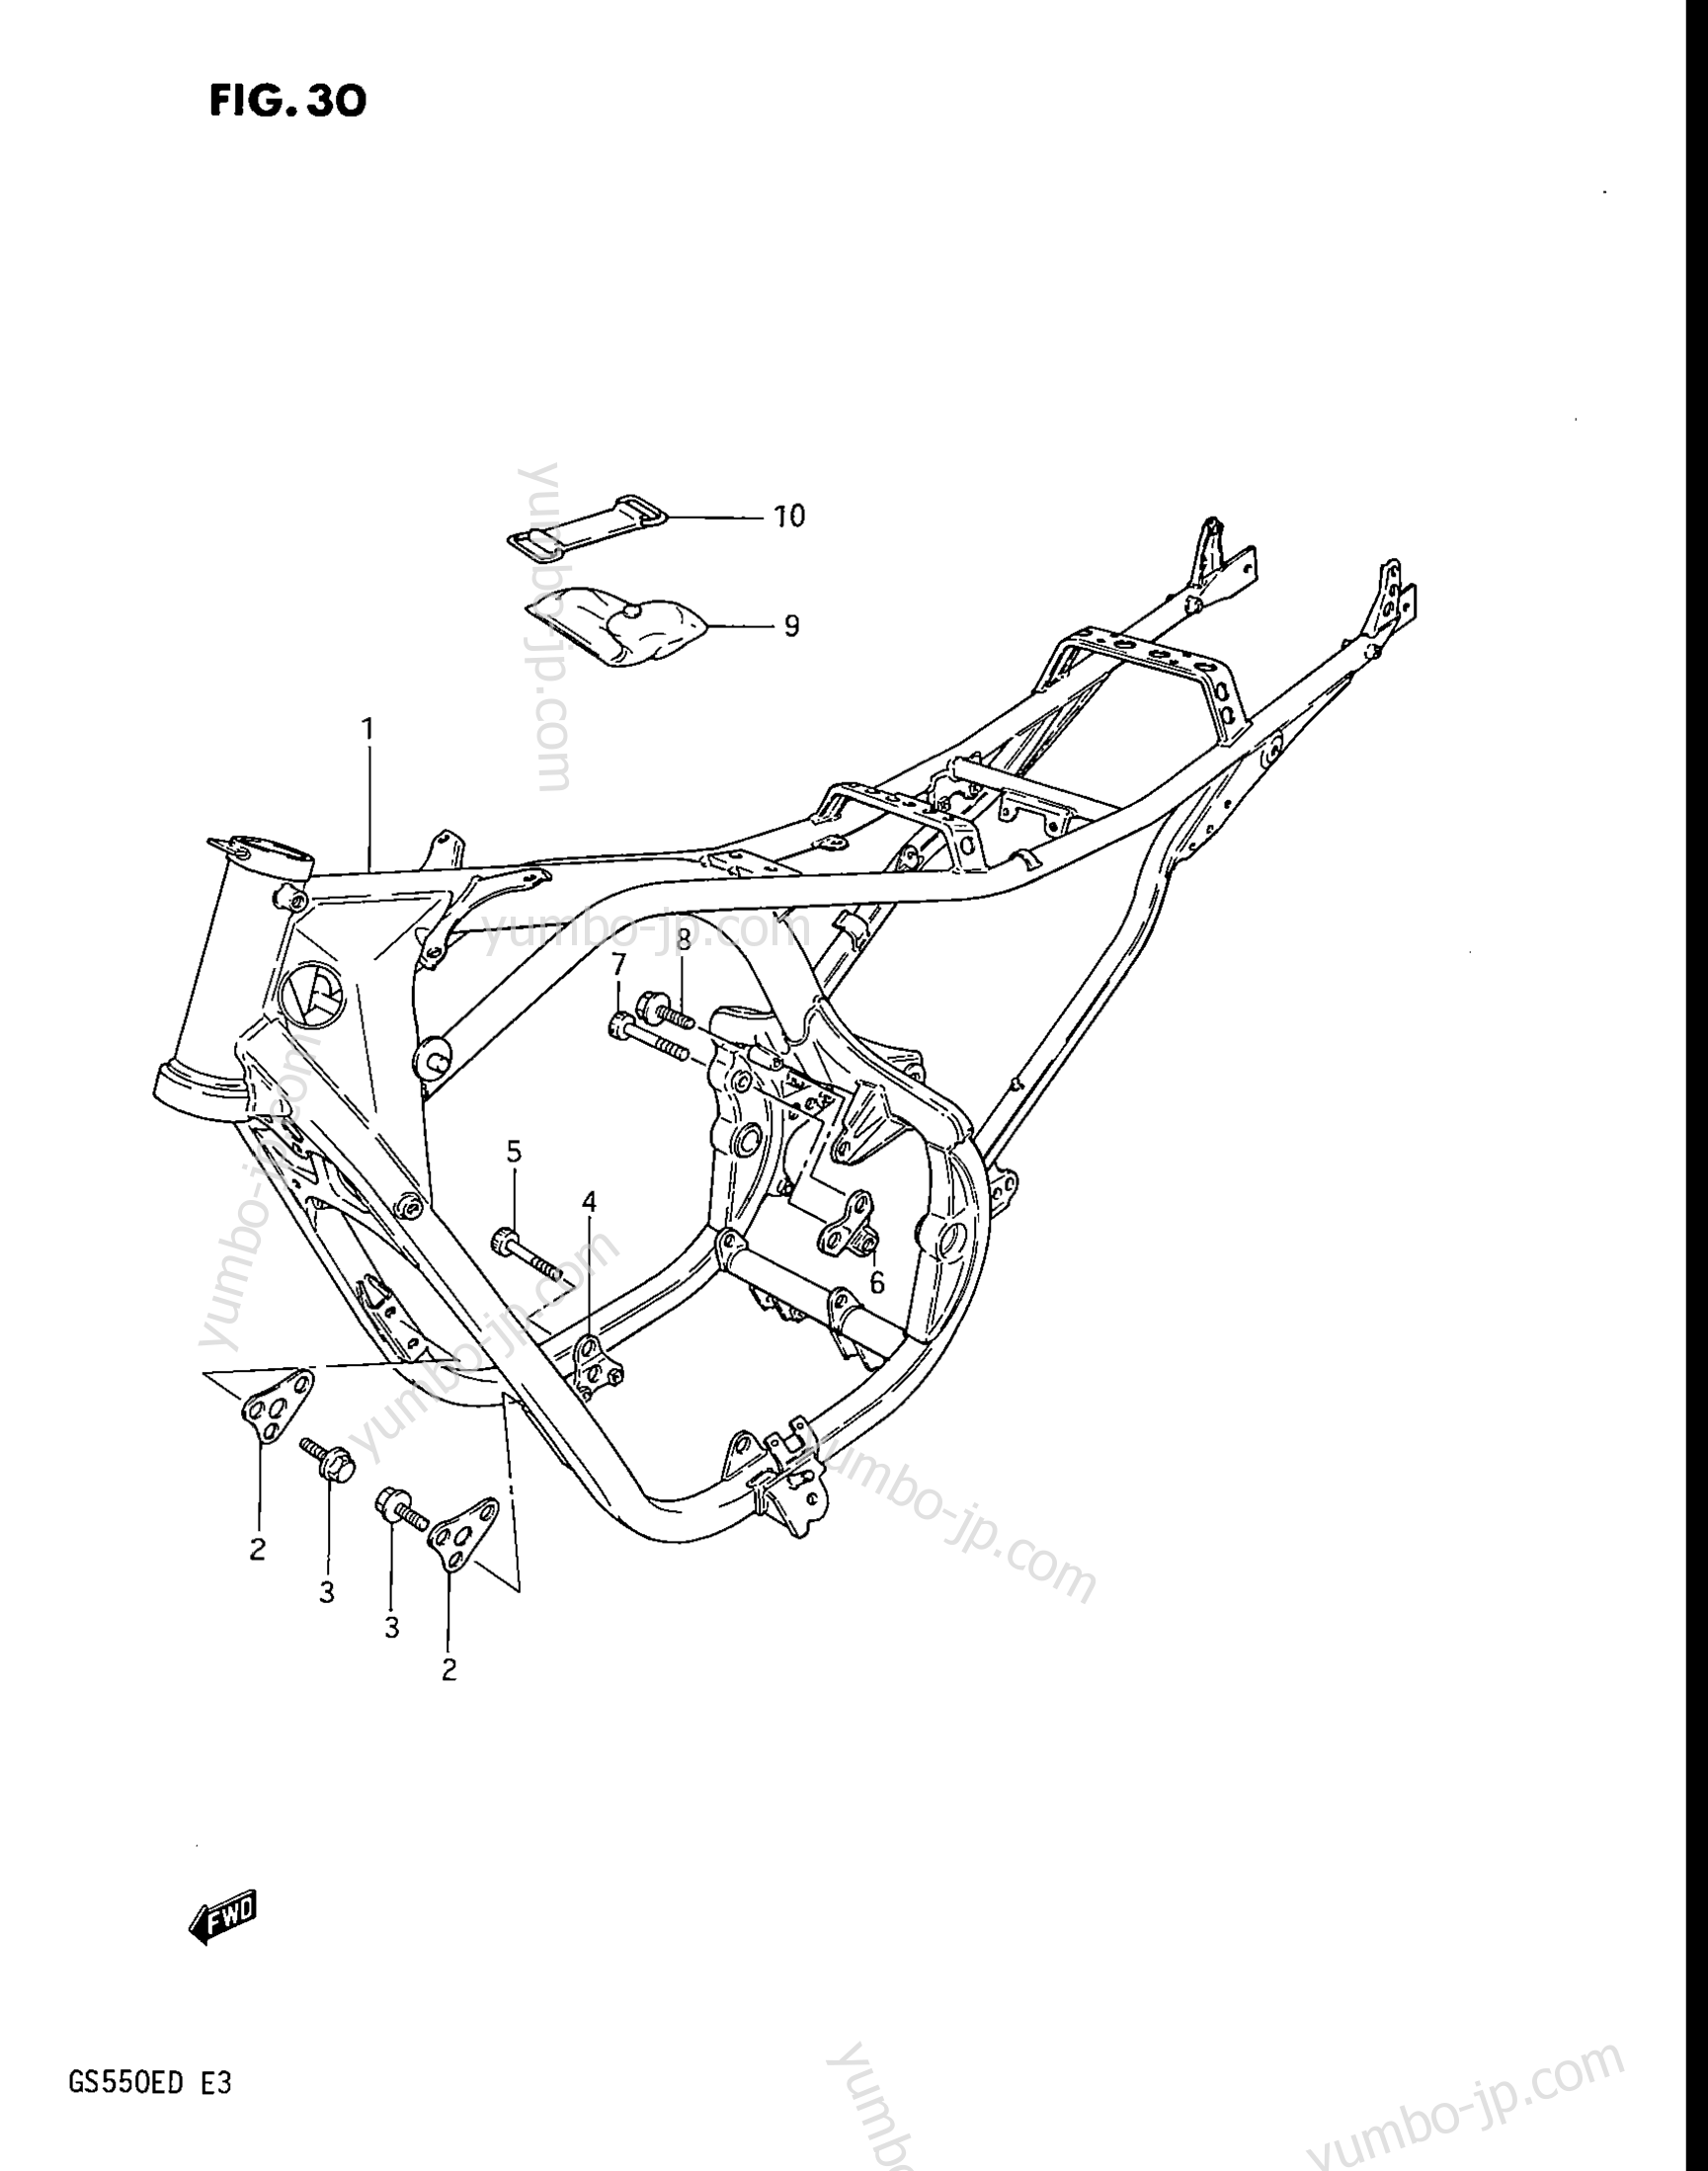 FRAME for motorcycles SUZUKI GS550E 1983 year